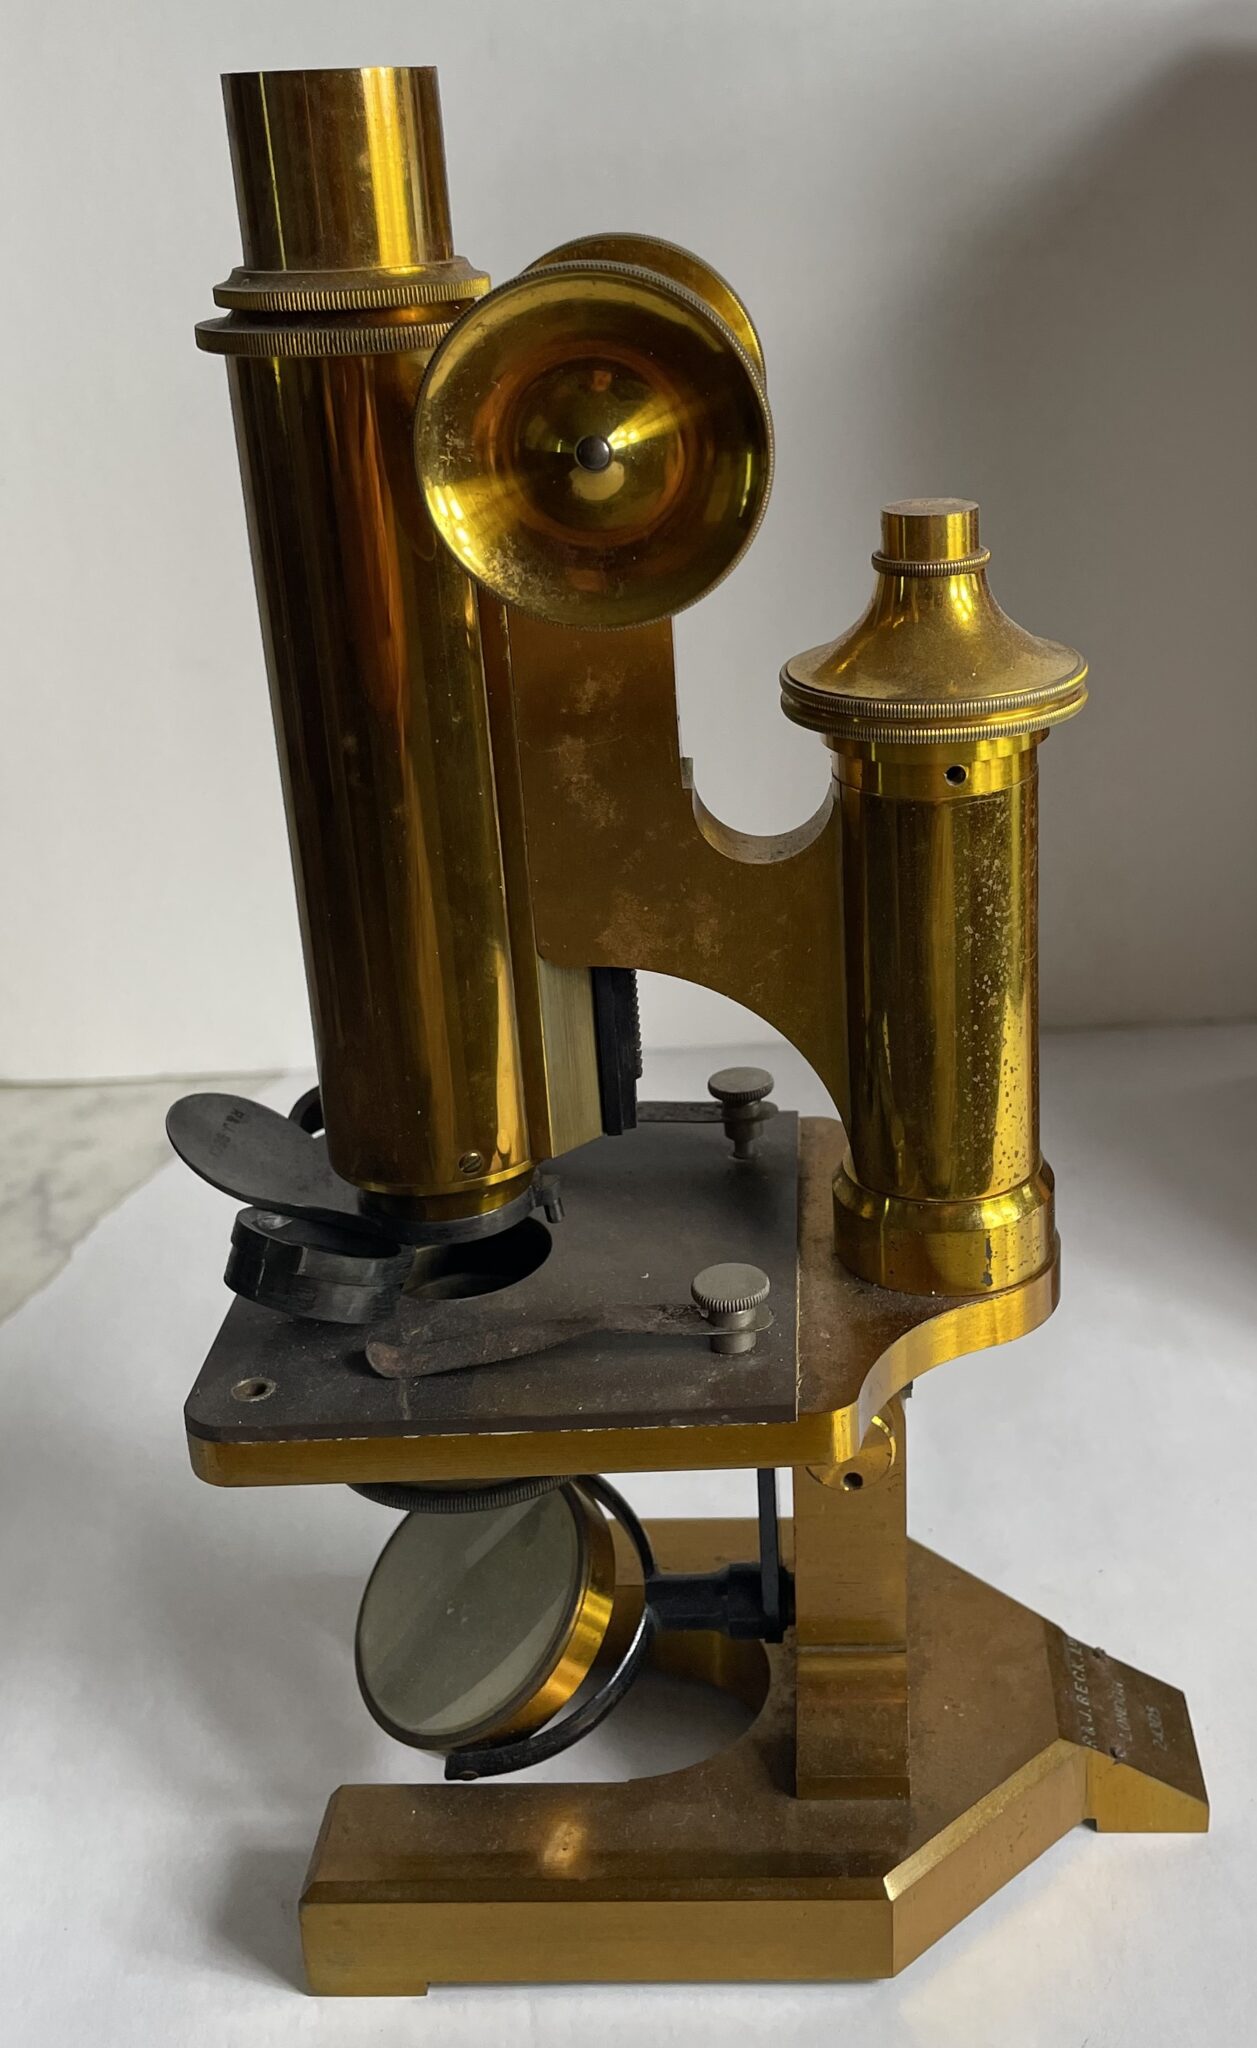 R&J Beck signed microscope.